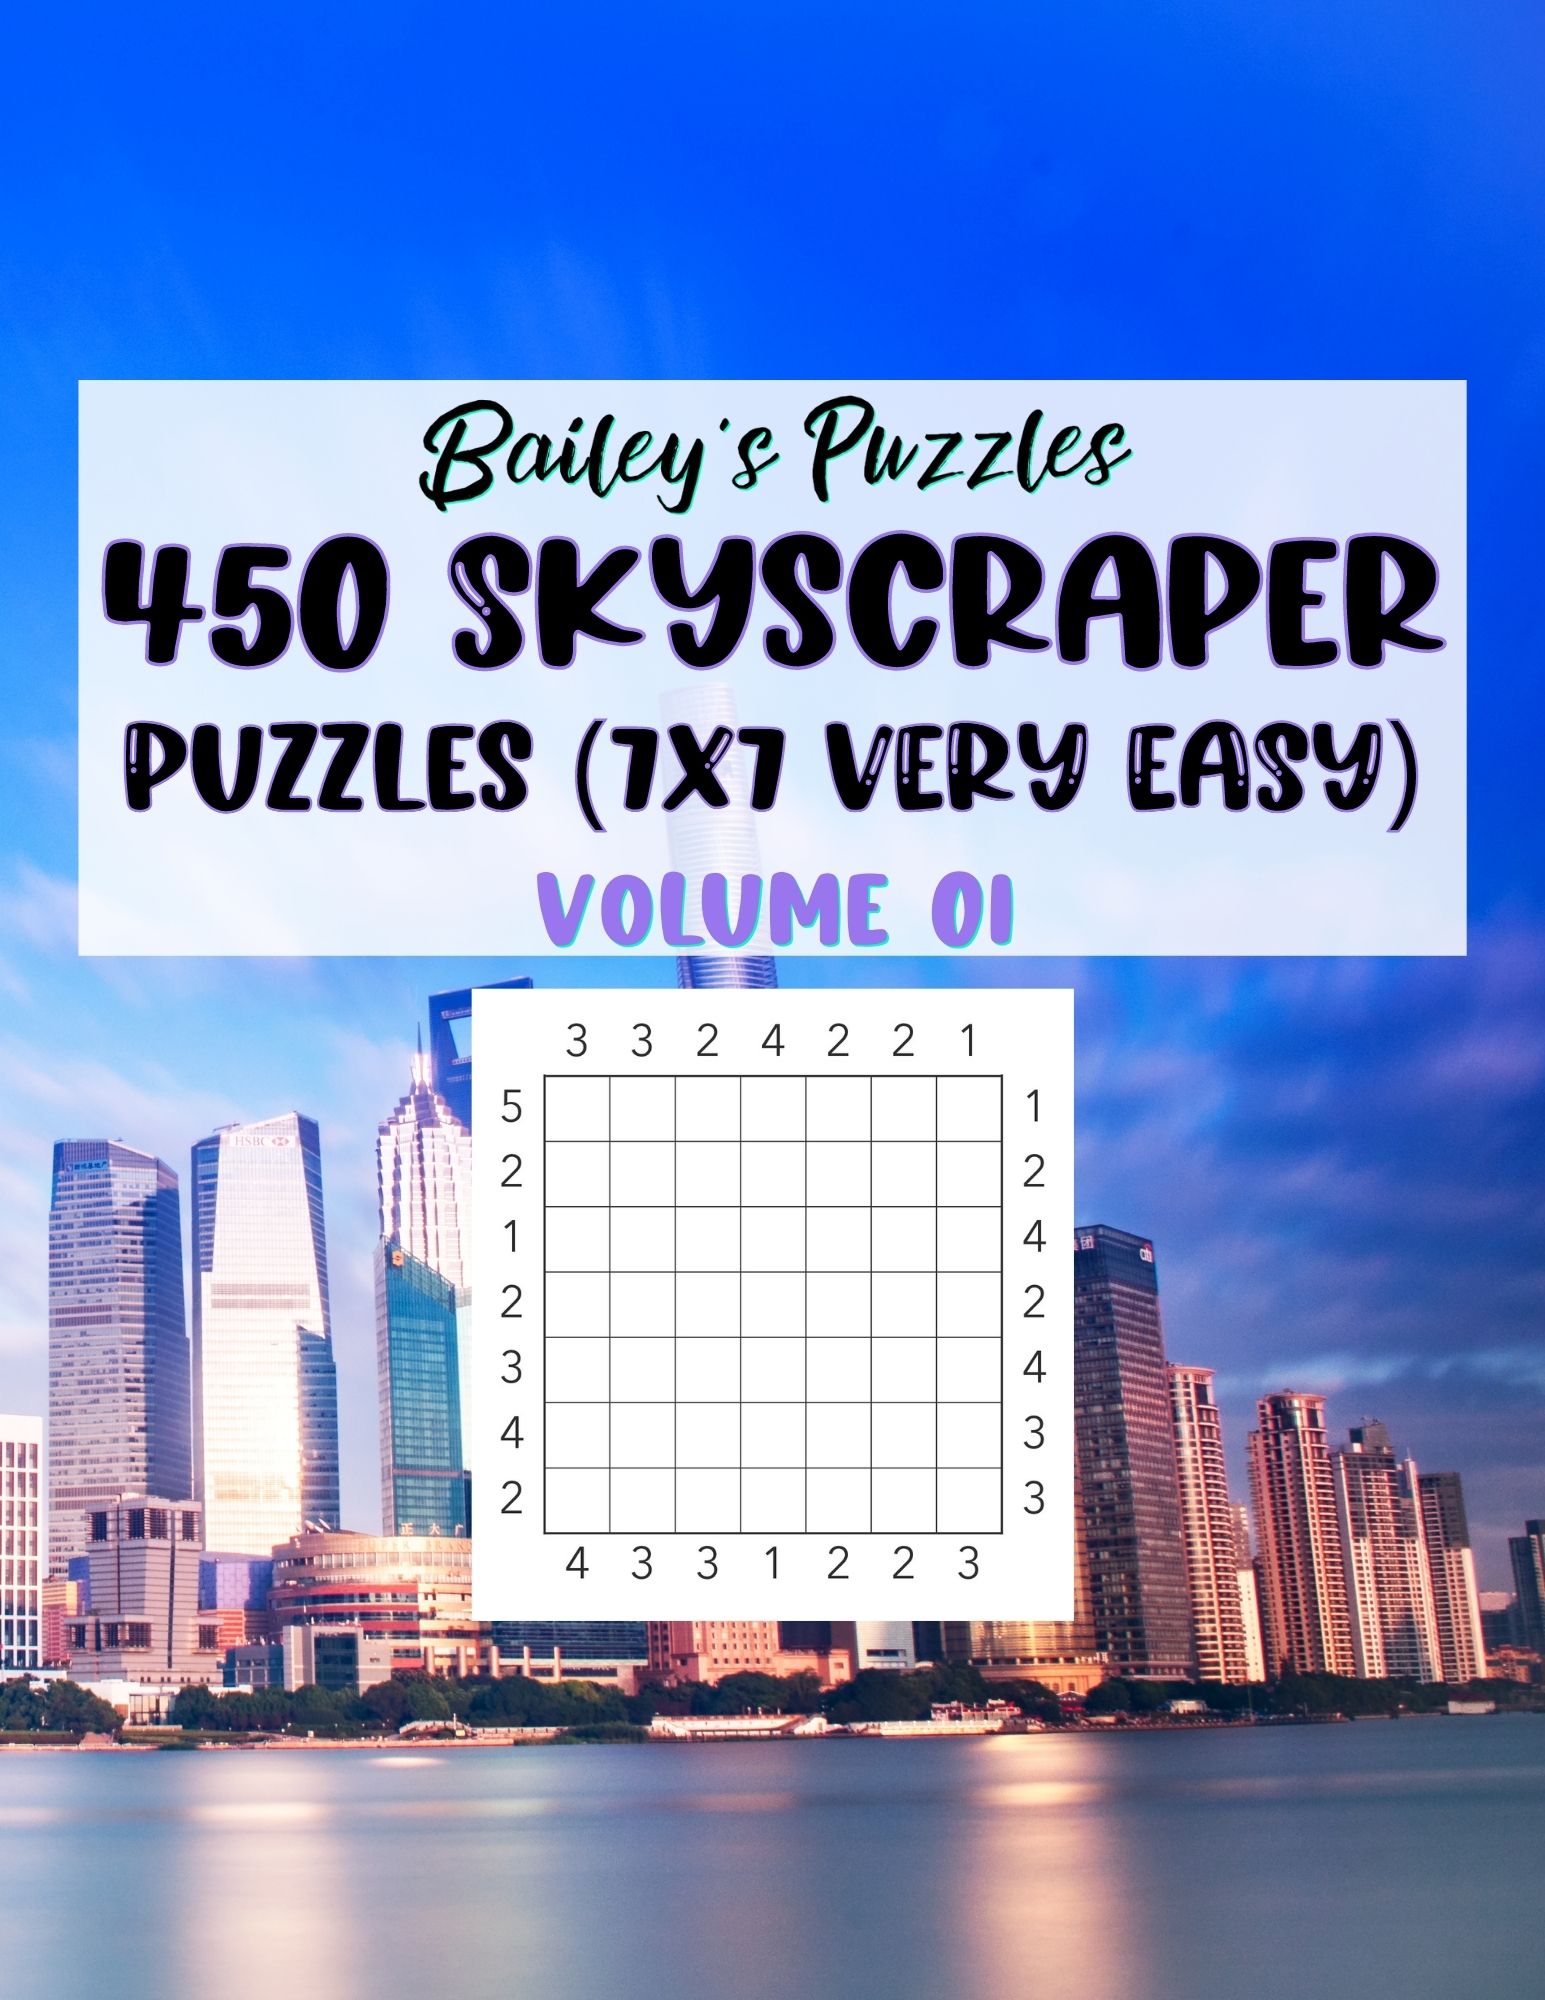 Front Cover - 450 Skyscraper Puzzles (7x7, very easy)